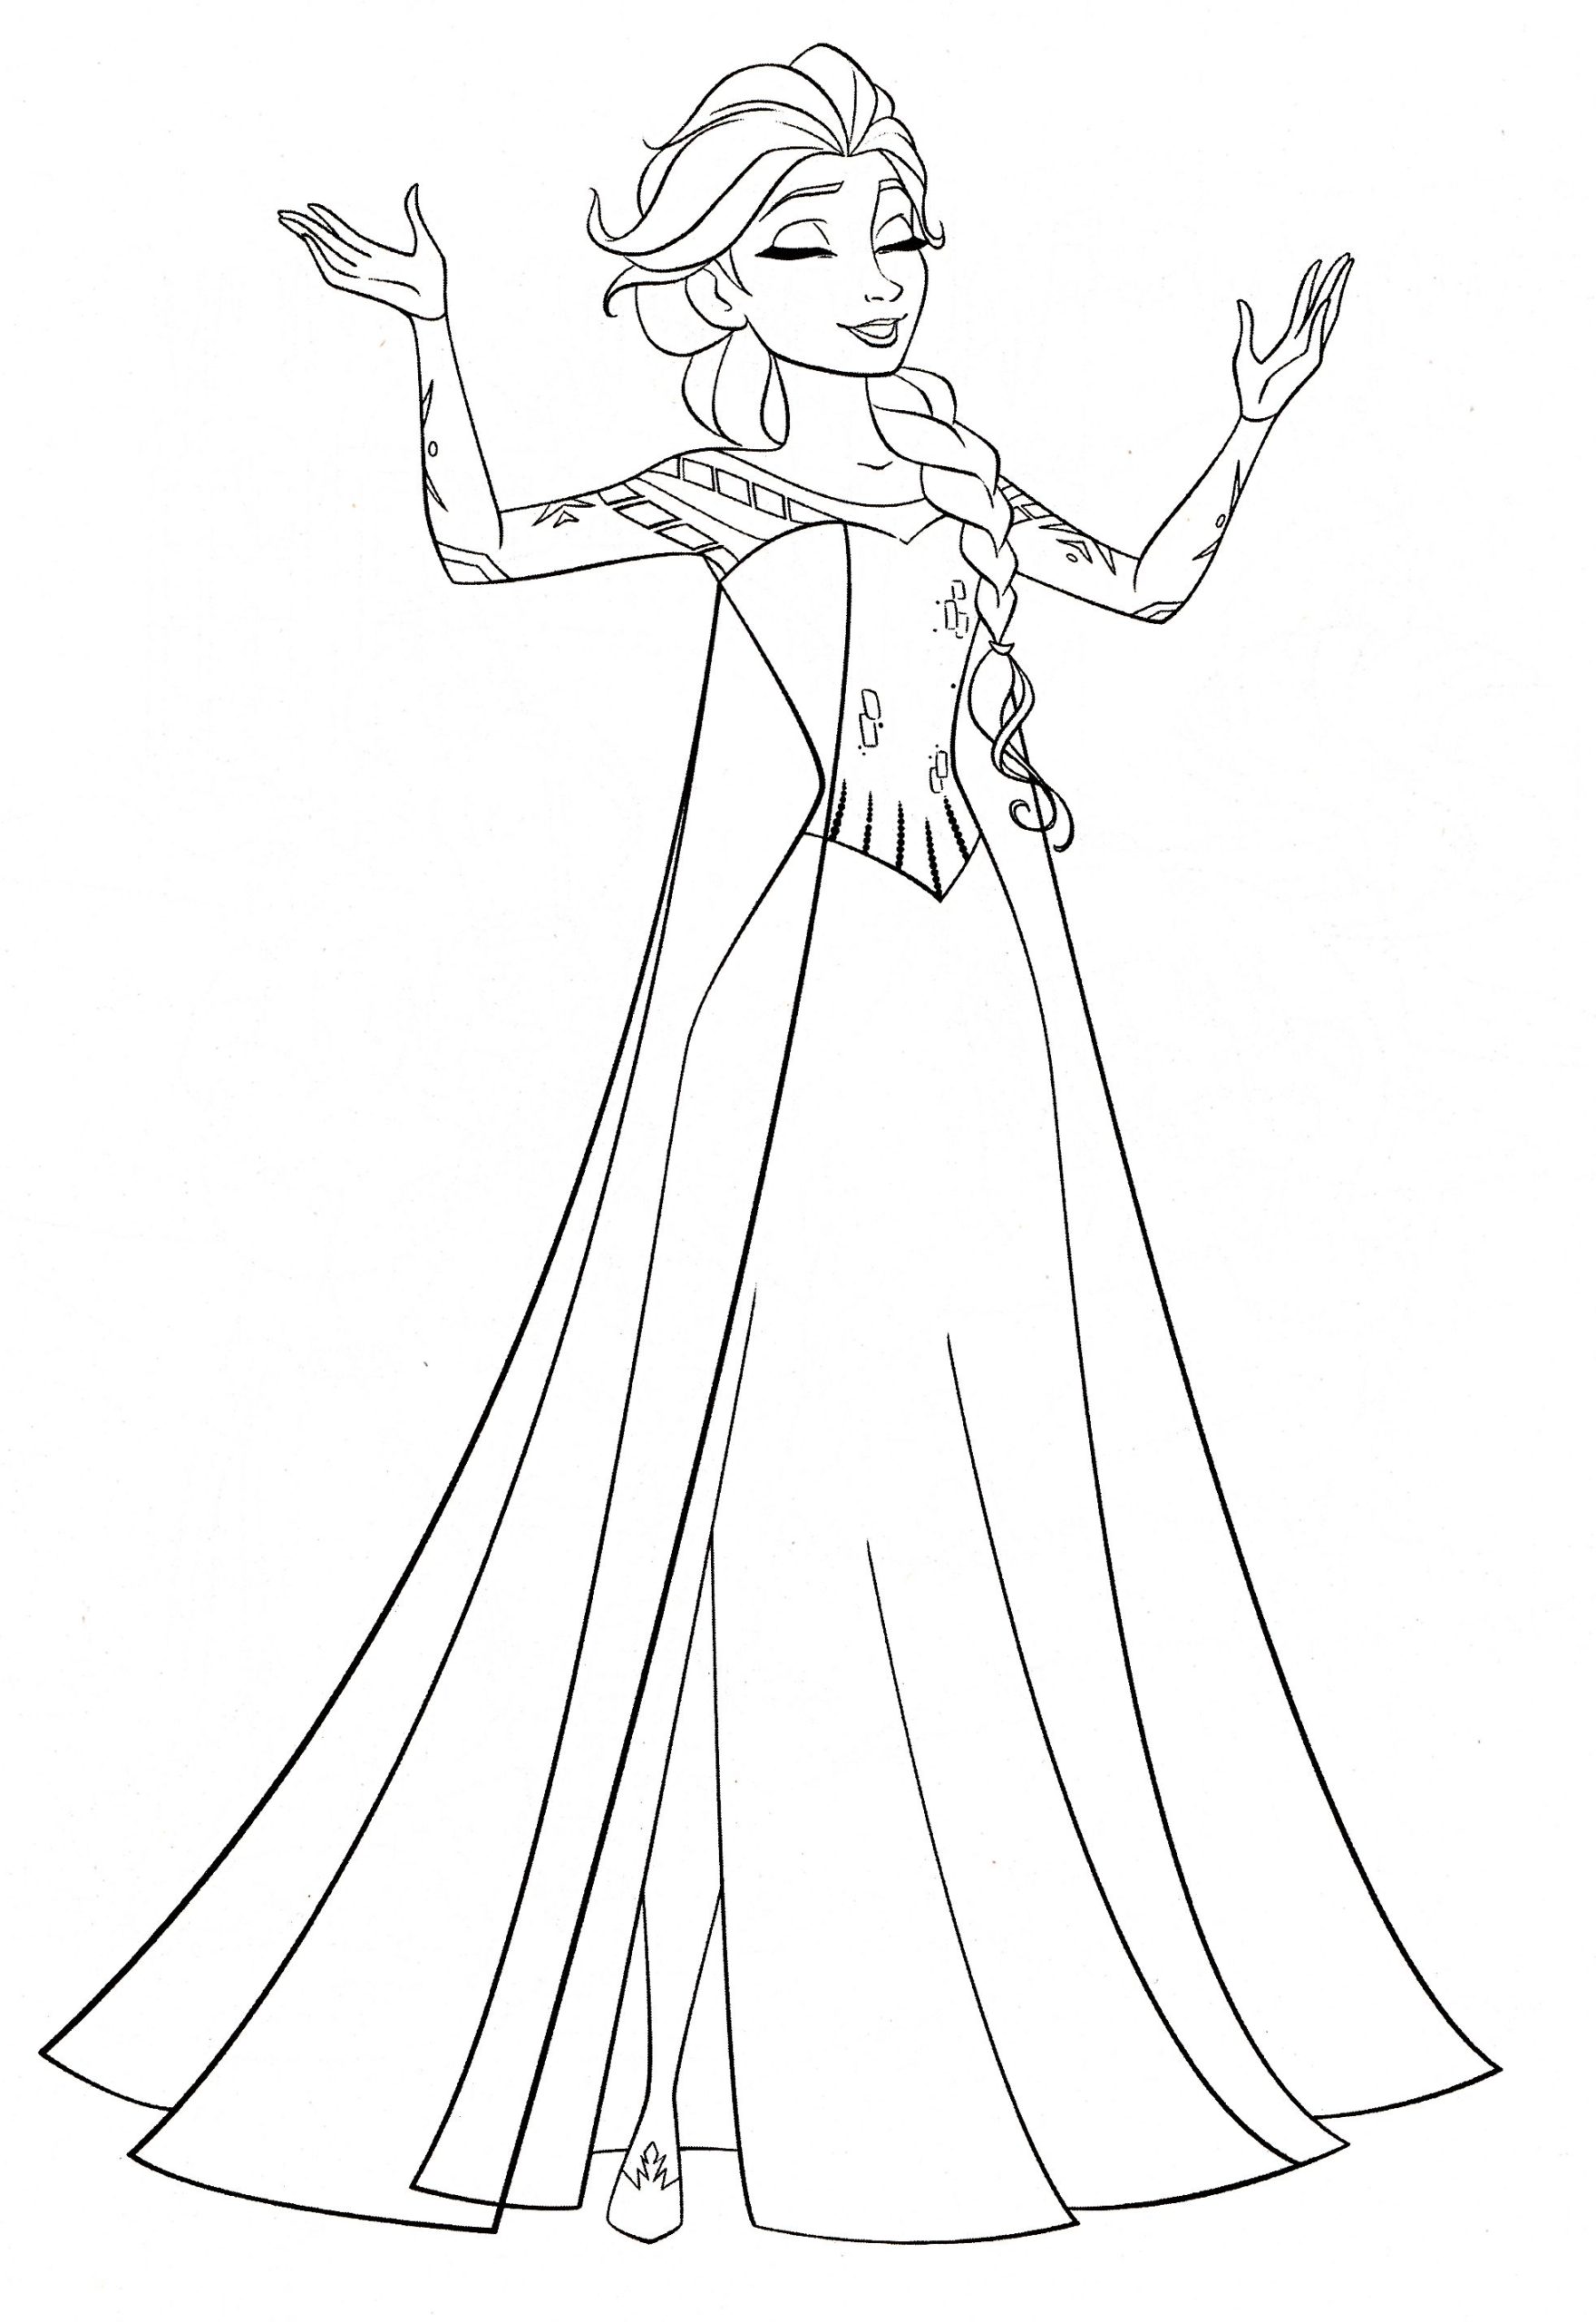 Coloring Pages : Elsa From Frozen Coloring Walt Disney Characters ...